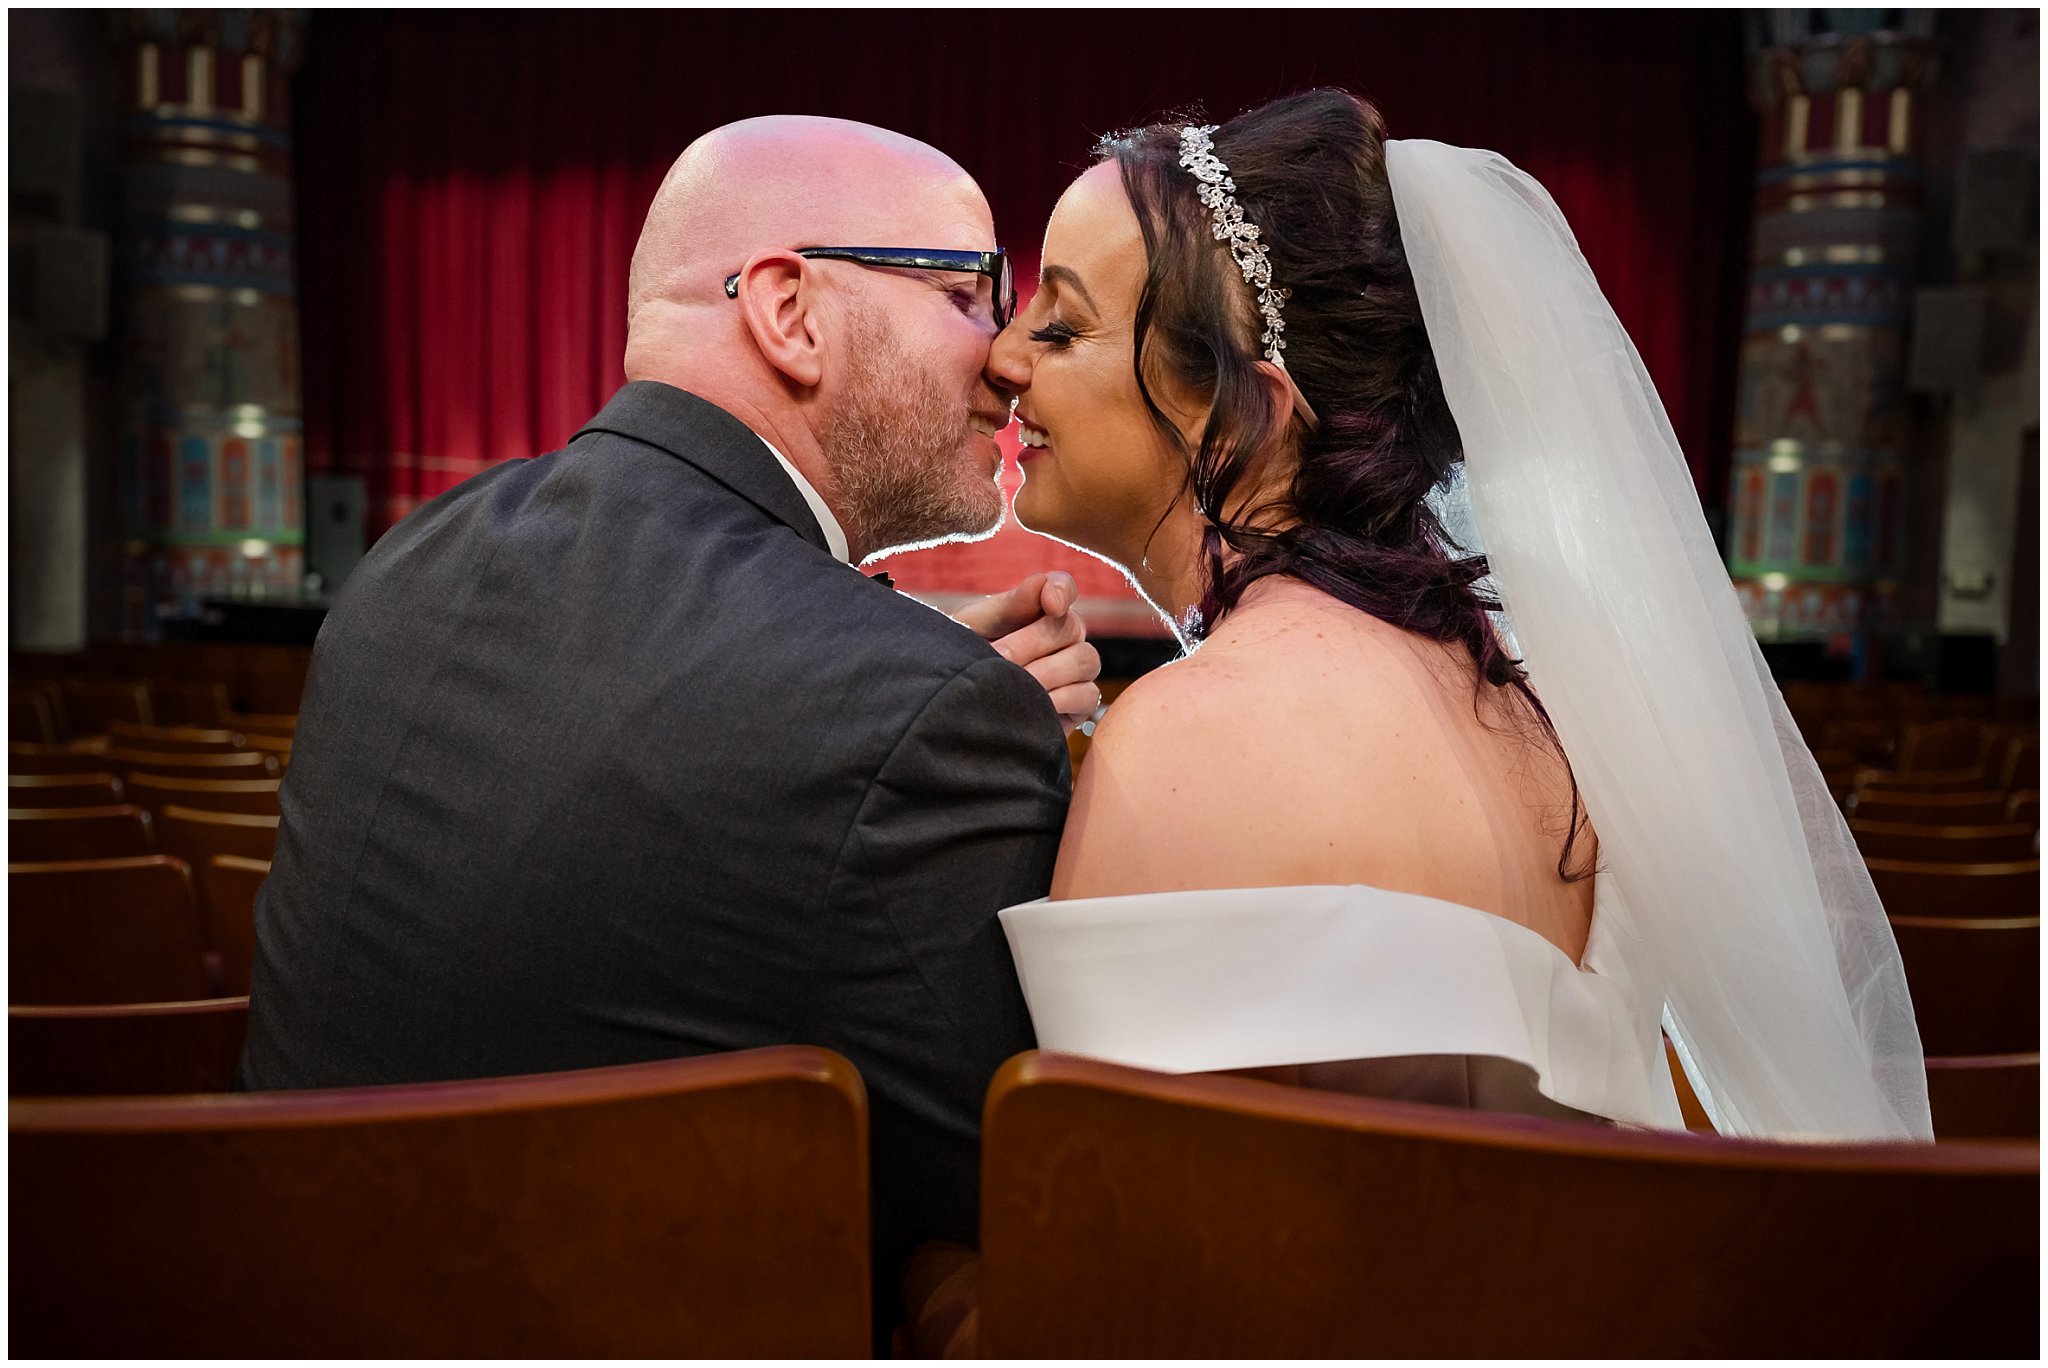 Bride and groom portrait in a theater | Broadway Musical Theatre Wedding